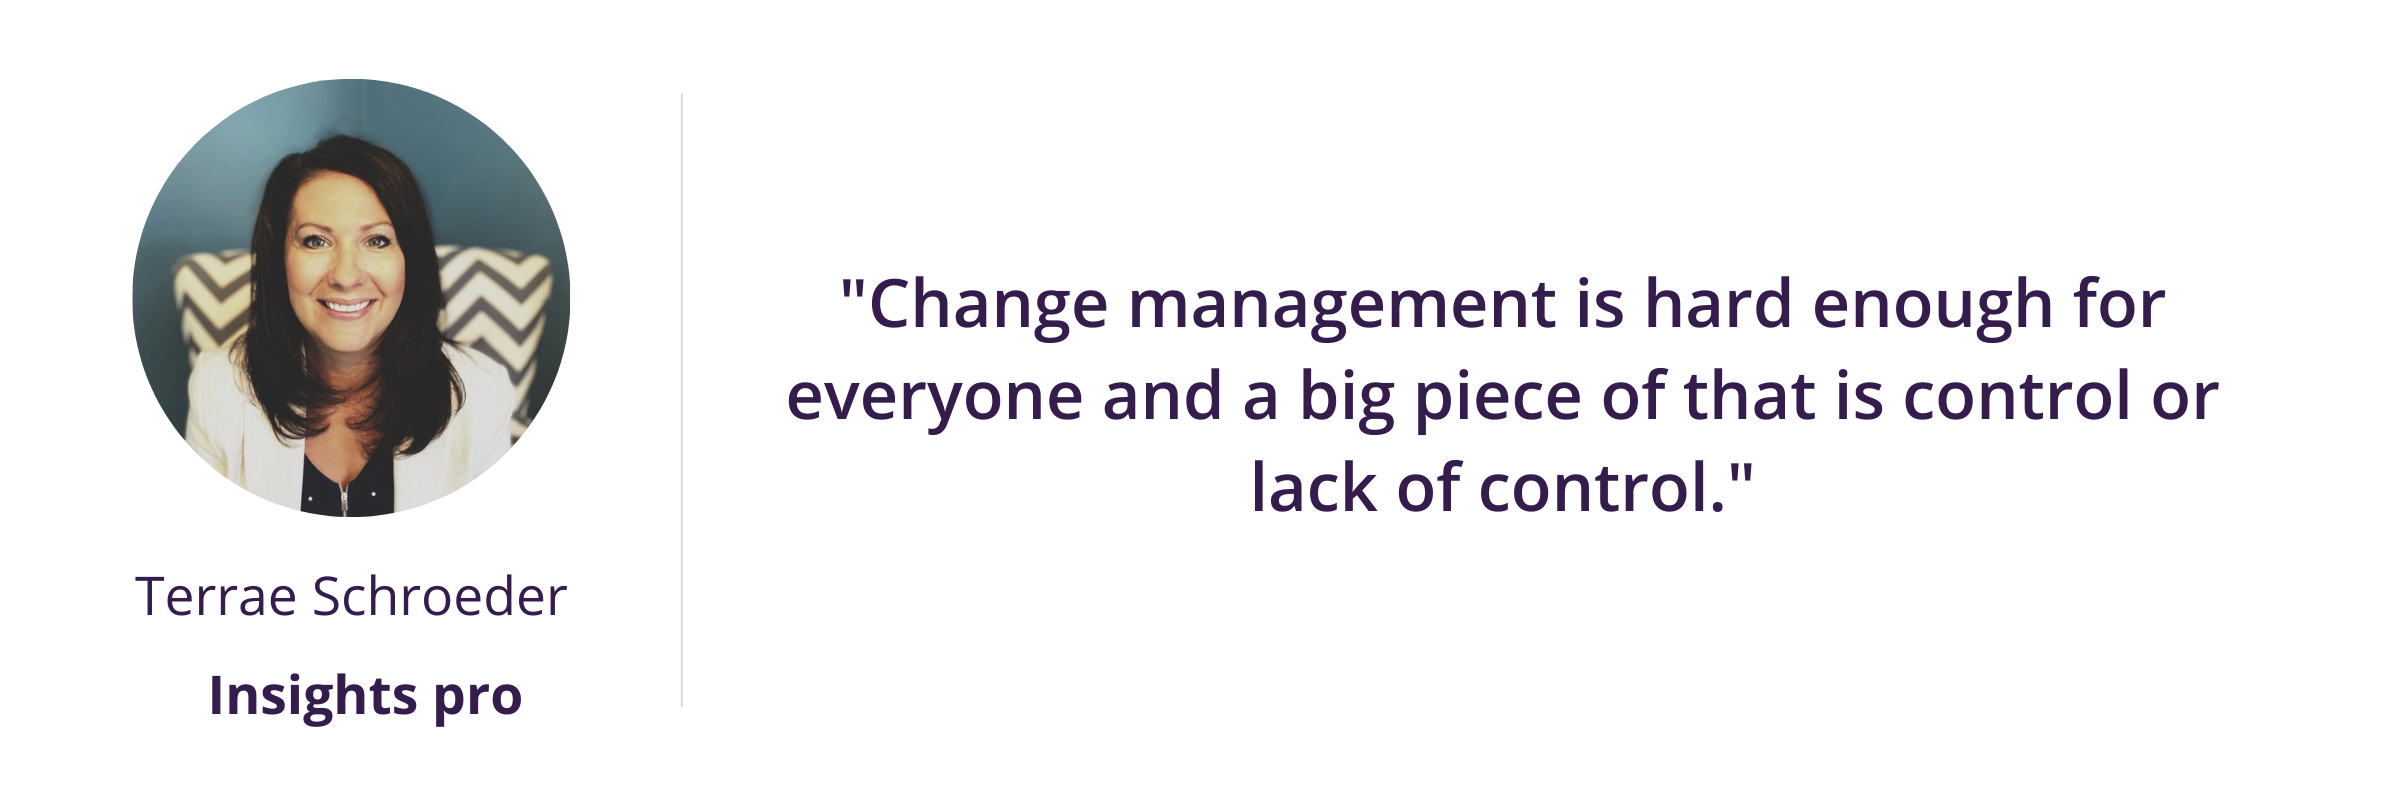 Change management is hard enough for everyone and a big piece of that is control or lack of control.